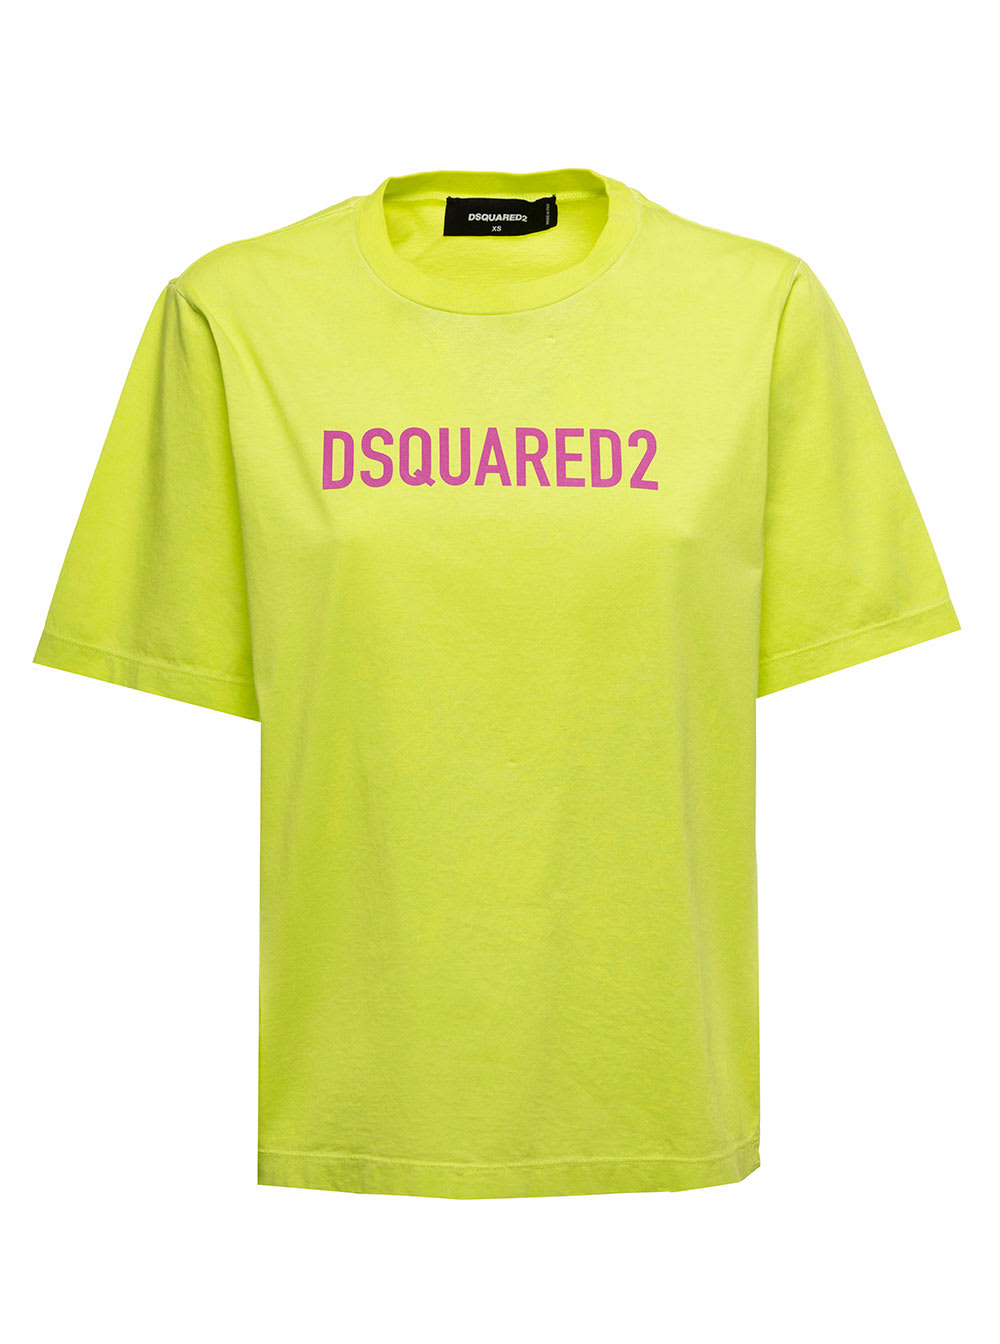 Dsquared2 D-squared2 Womans Yellow Cotton T-shirt With Logo Print